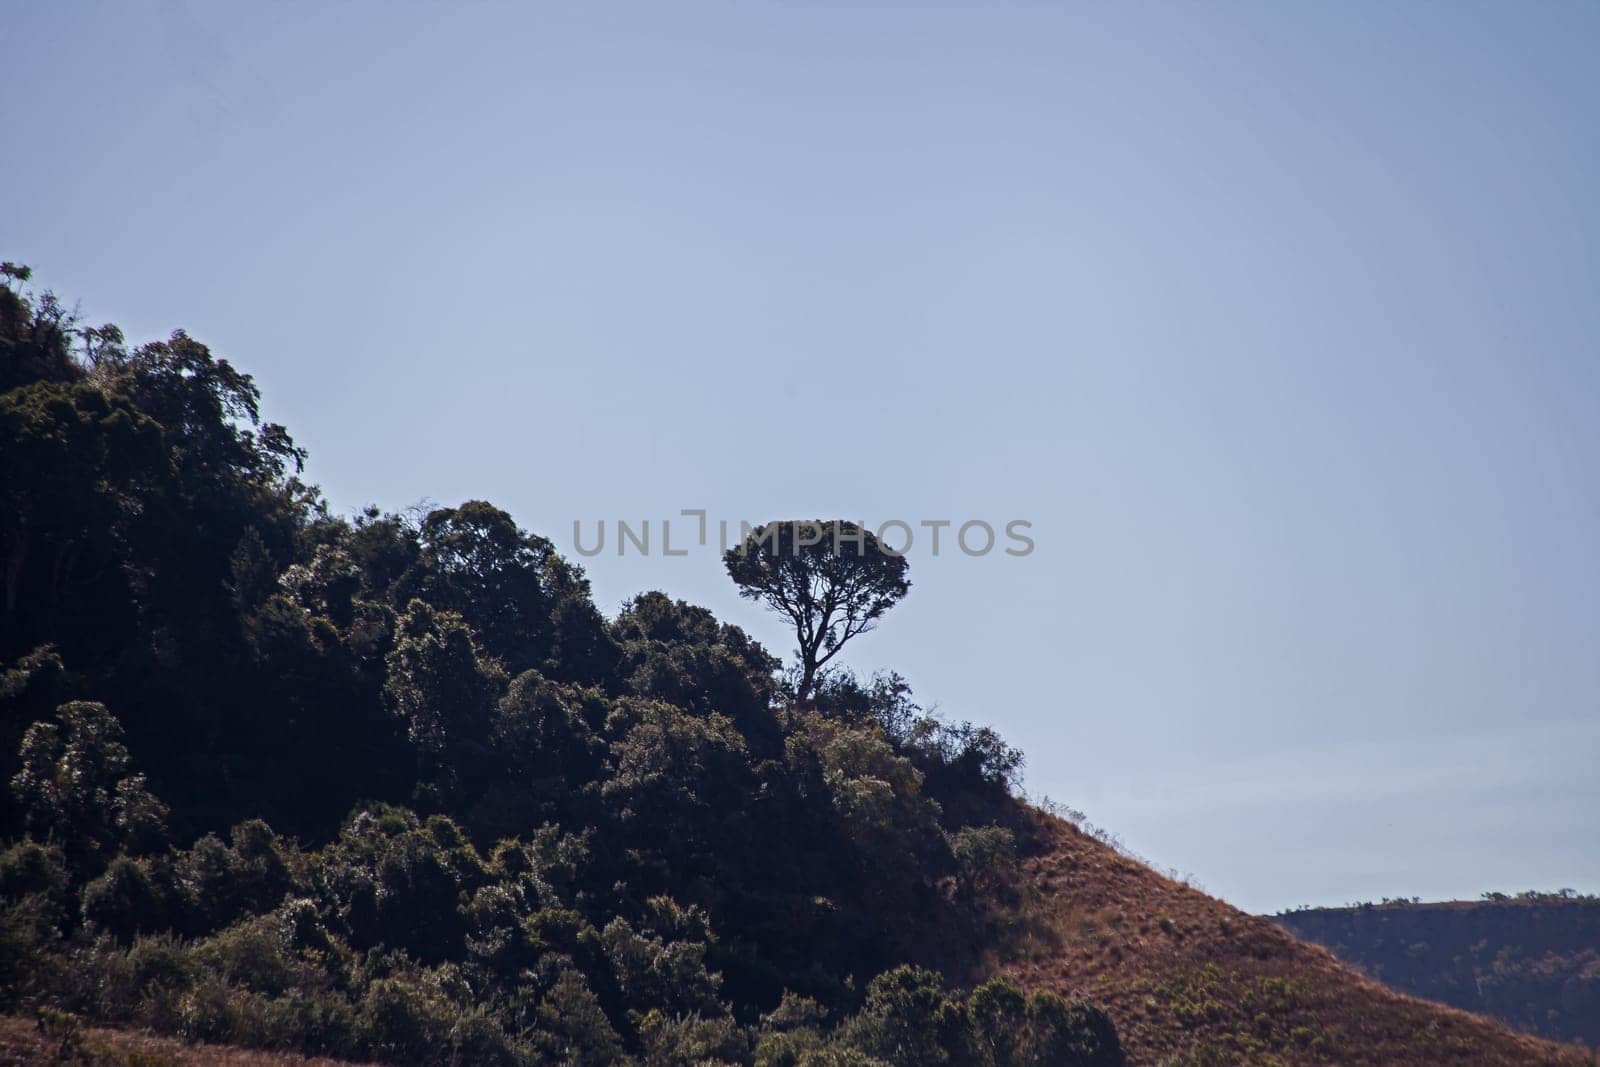 A tree on the horizon in the Royal Natal National Park in the Drakensberg South Africa